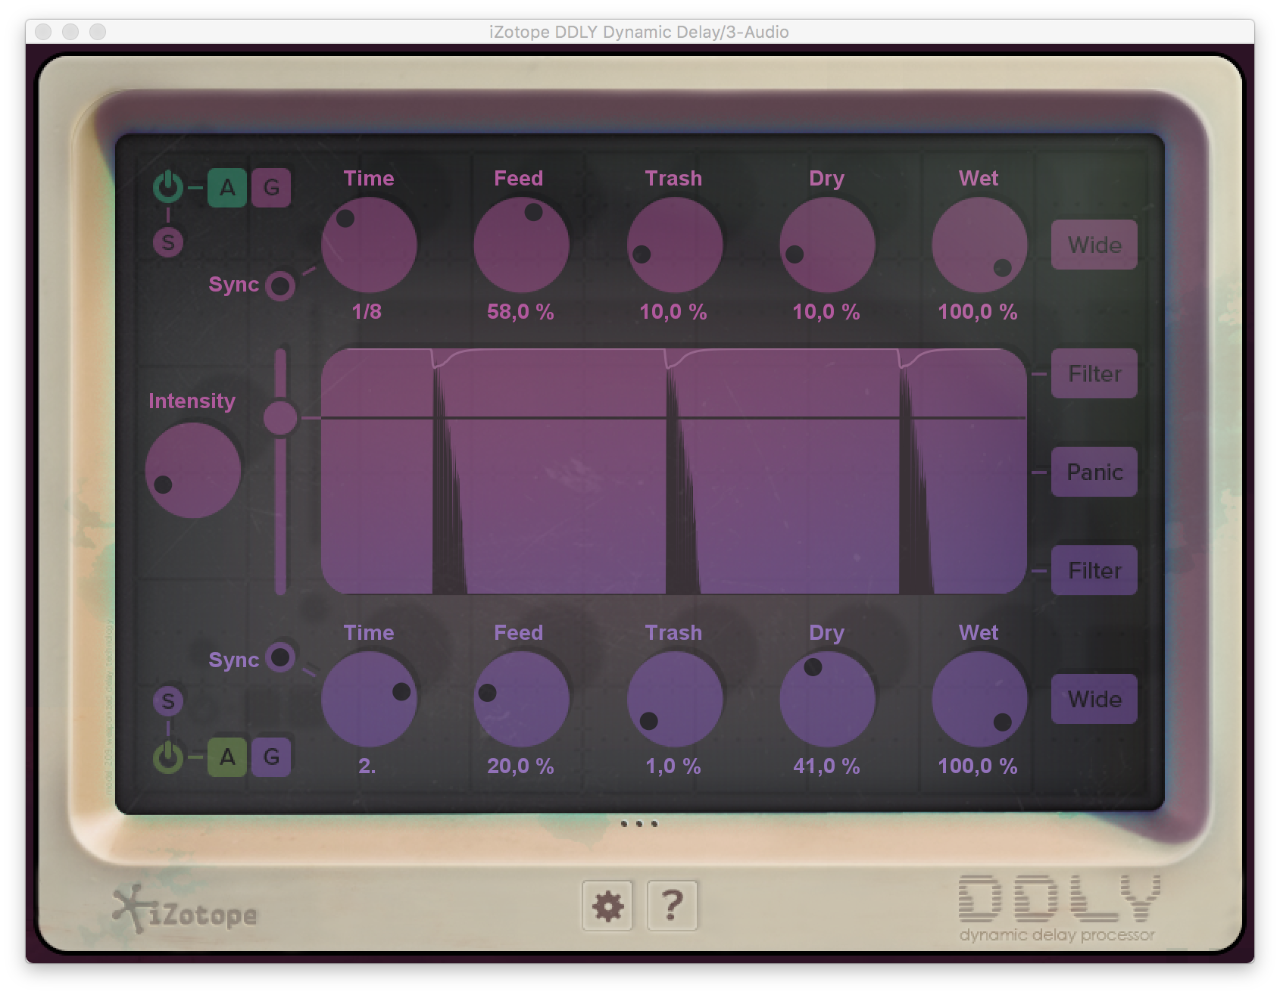 iZotope DDLY